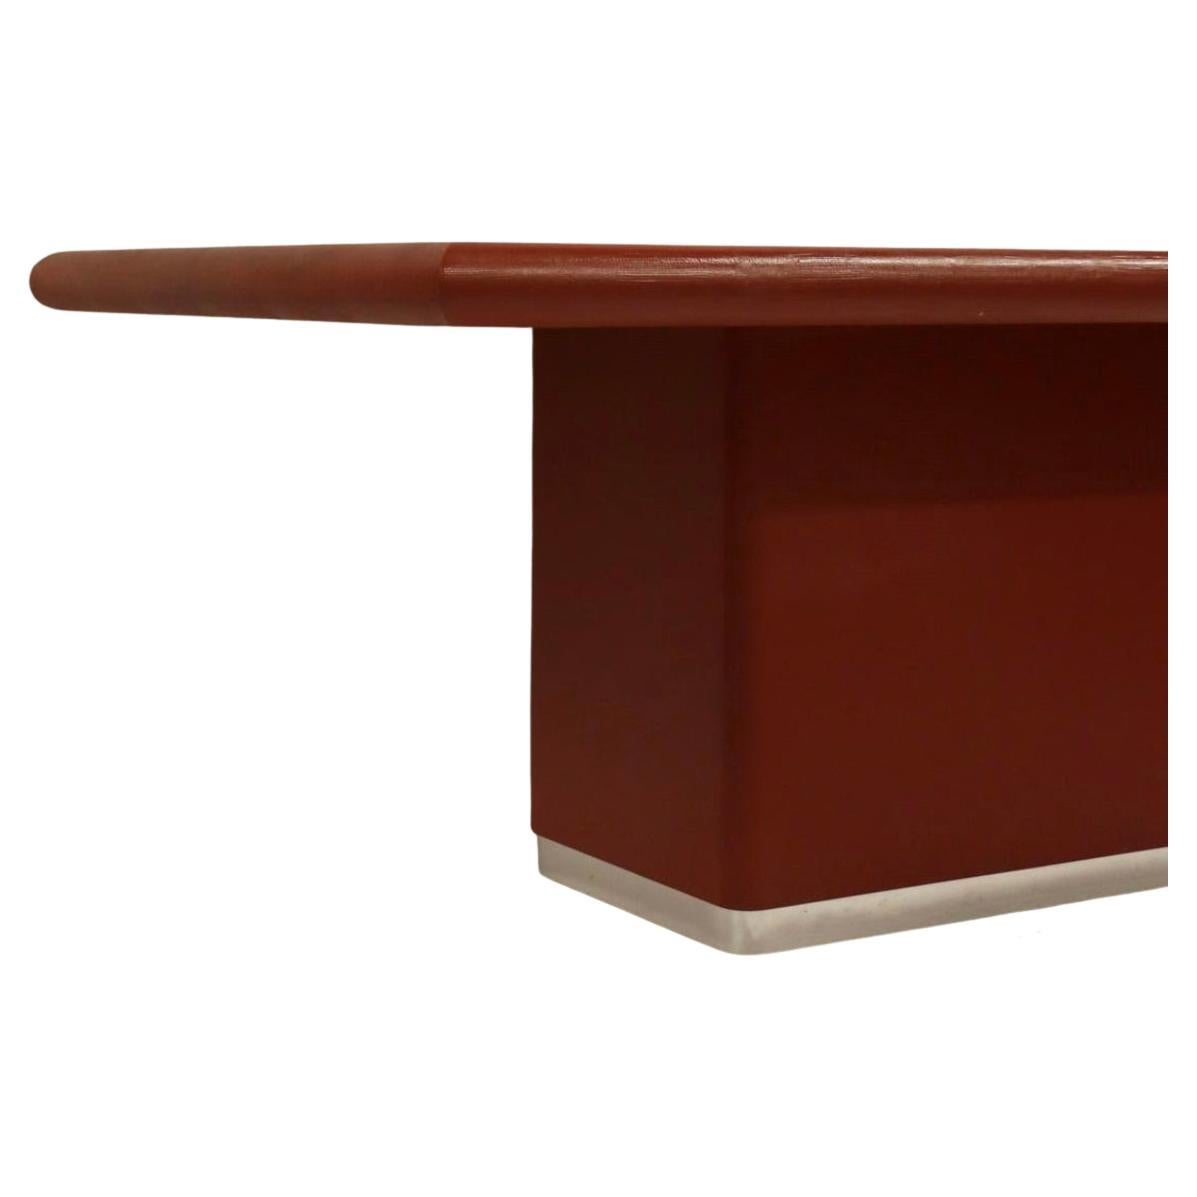 American Mid-Century Modern Lacquered Red Goatskin Dining Table Karl Springer For Sale